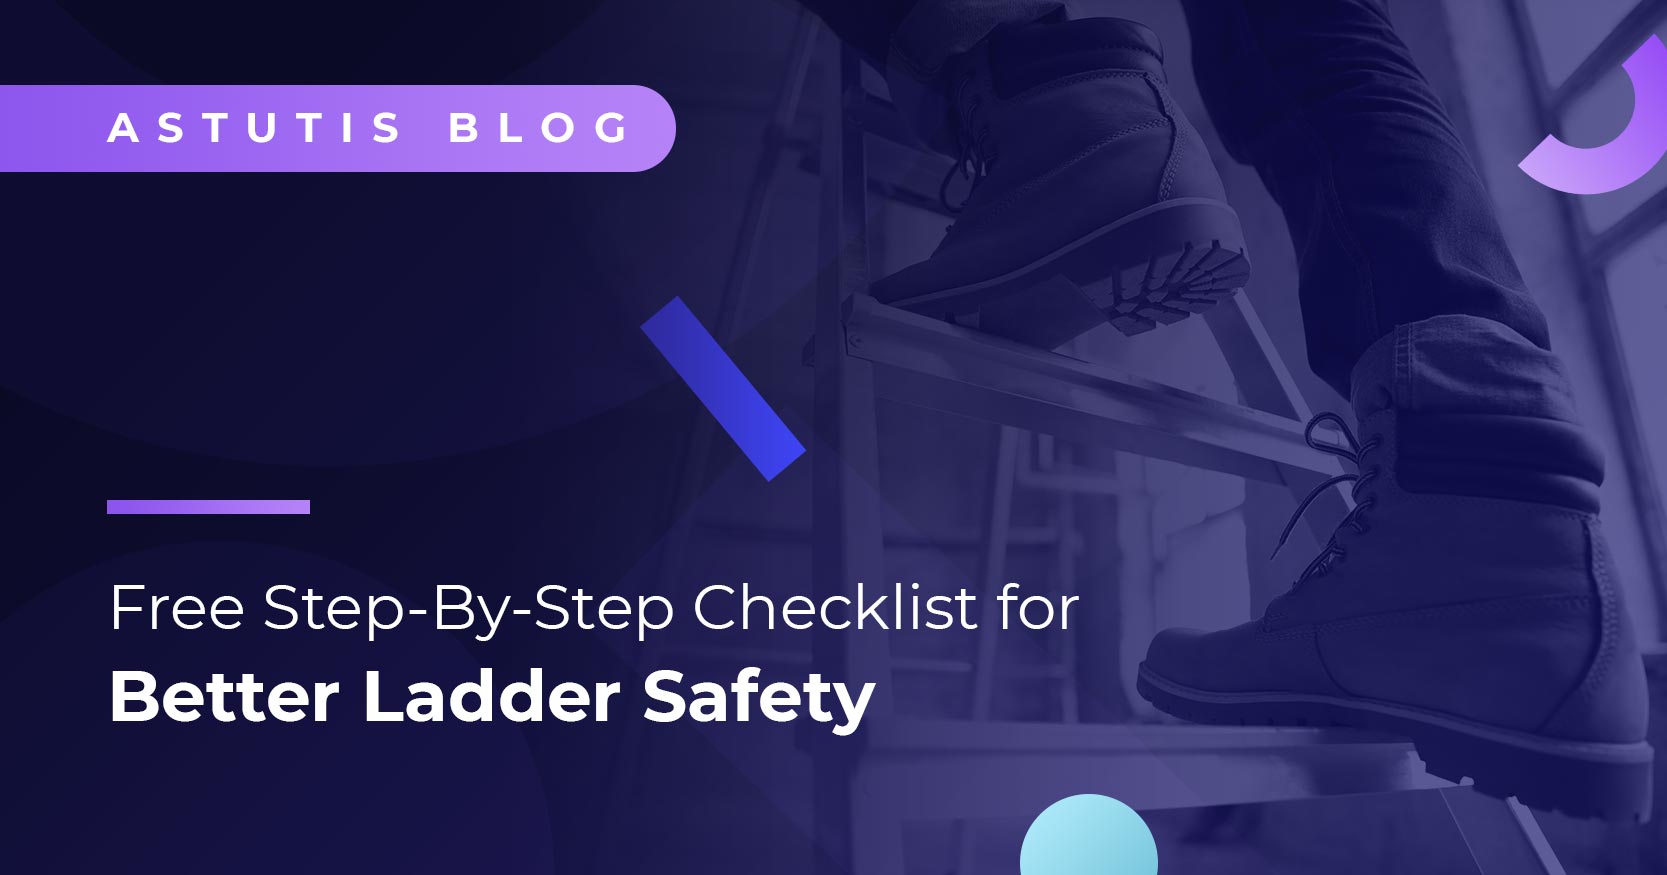 Free Step-By-Step Checklist for Better Ladder Safety  Image